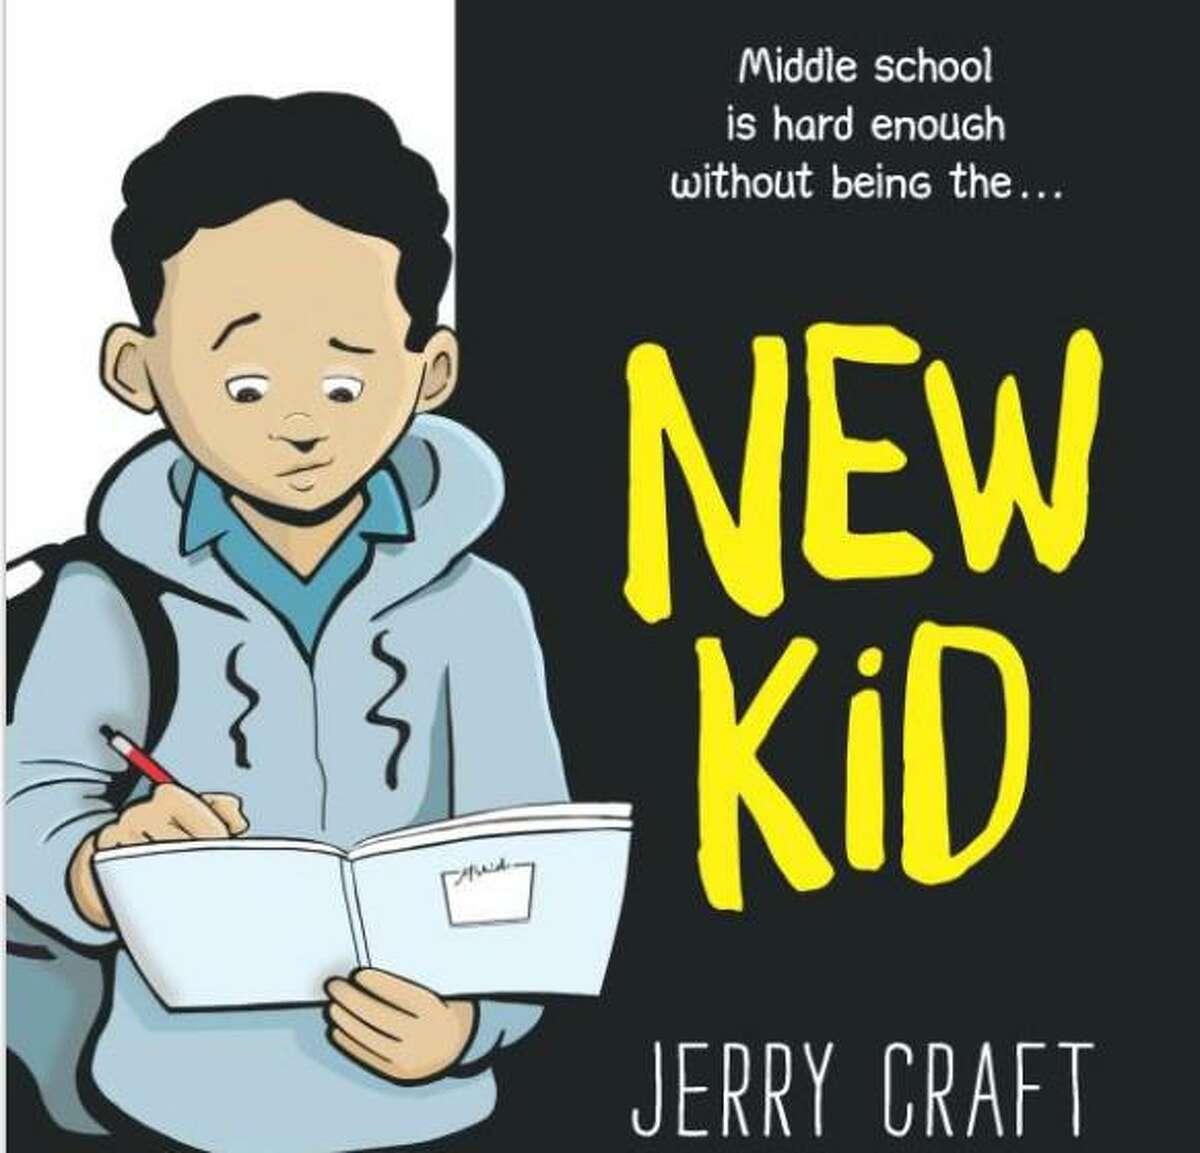 Jerry Craft is the author of numerous award-willing children’s books.